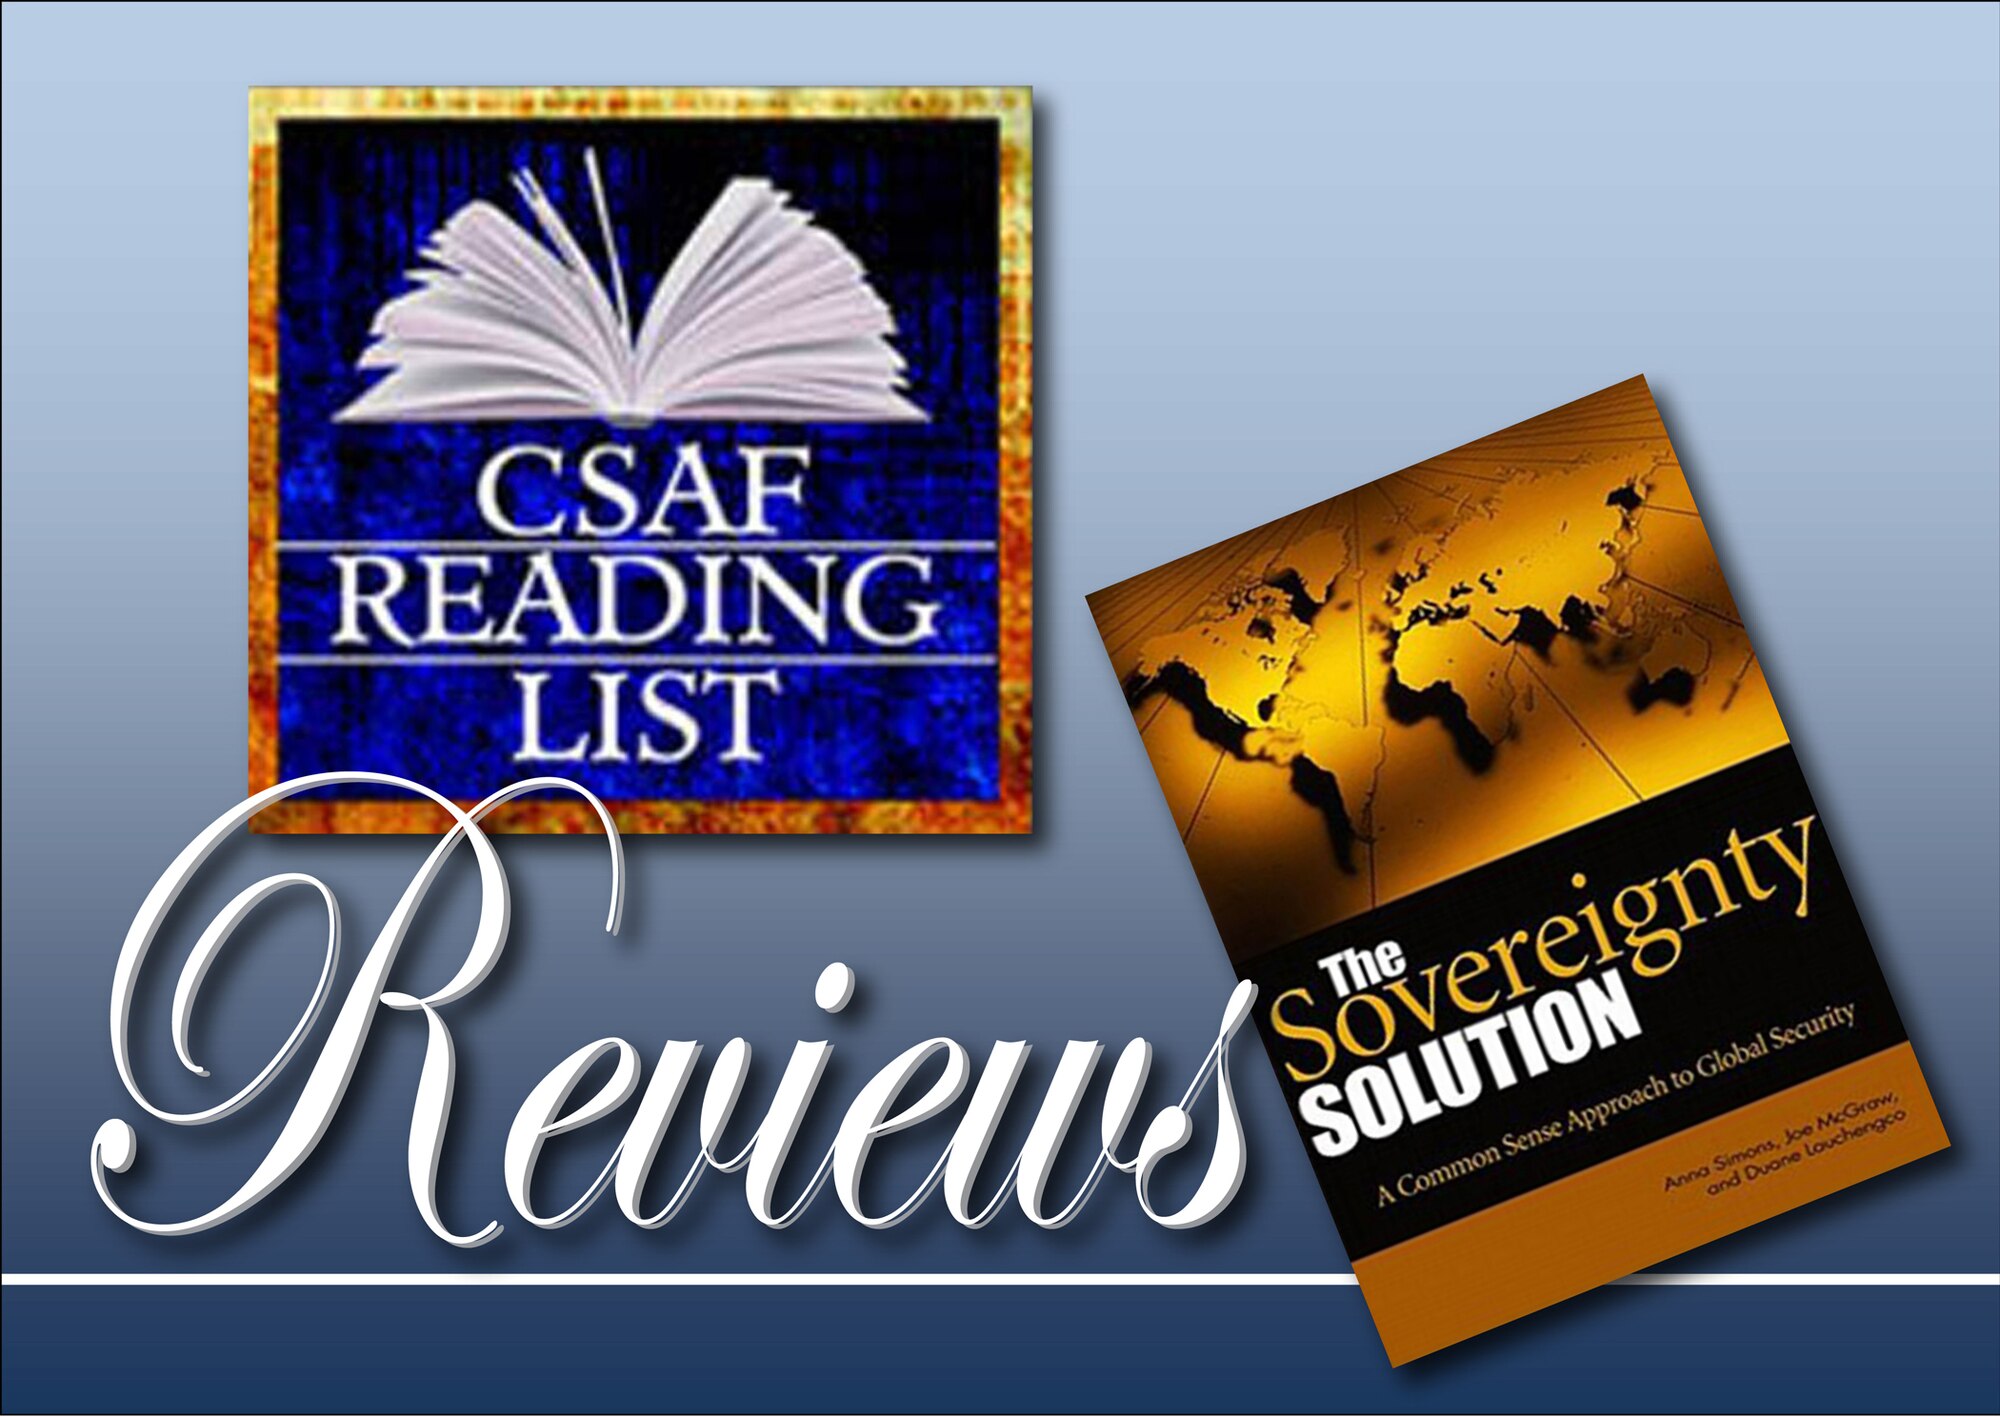 CSAF Reading List Reviews "The Sovereignty Solution" > Grand Forks Air